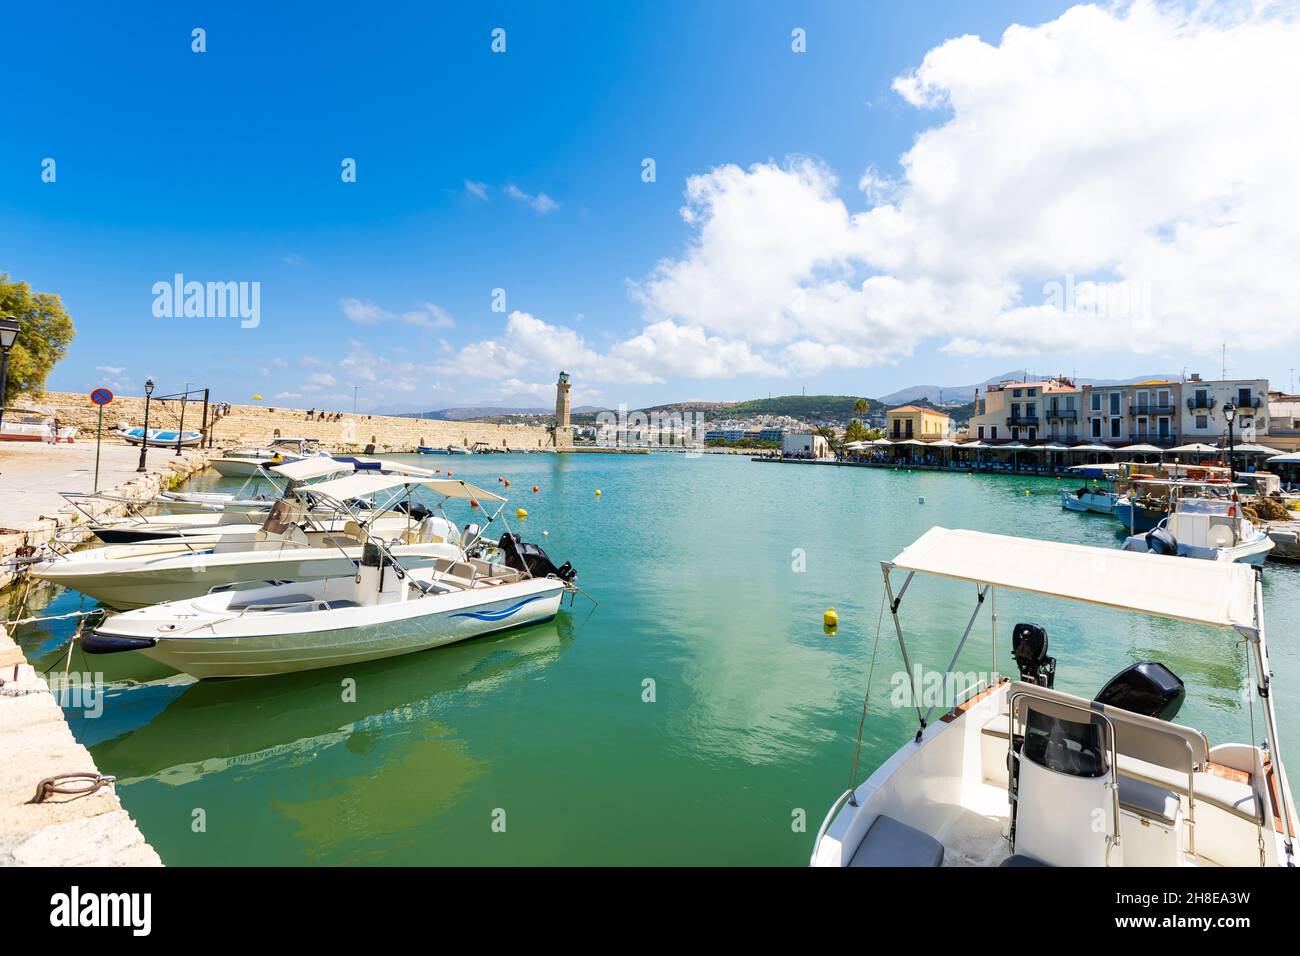 Crete, Greece. Harbor with marine vessels, boats and lighthouse. Rethymno Stock Photo